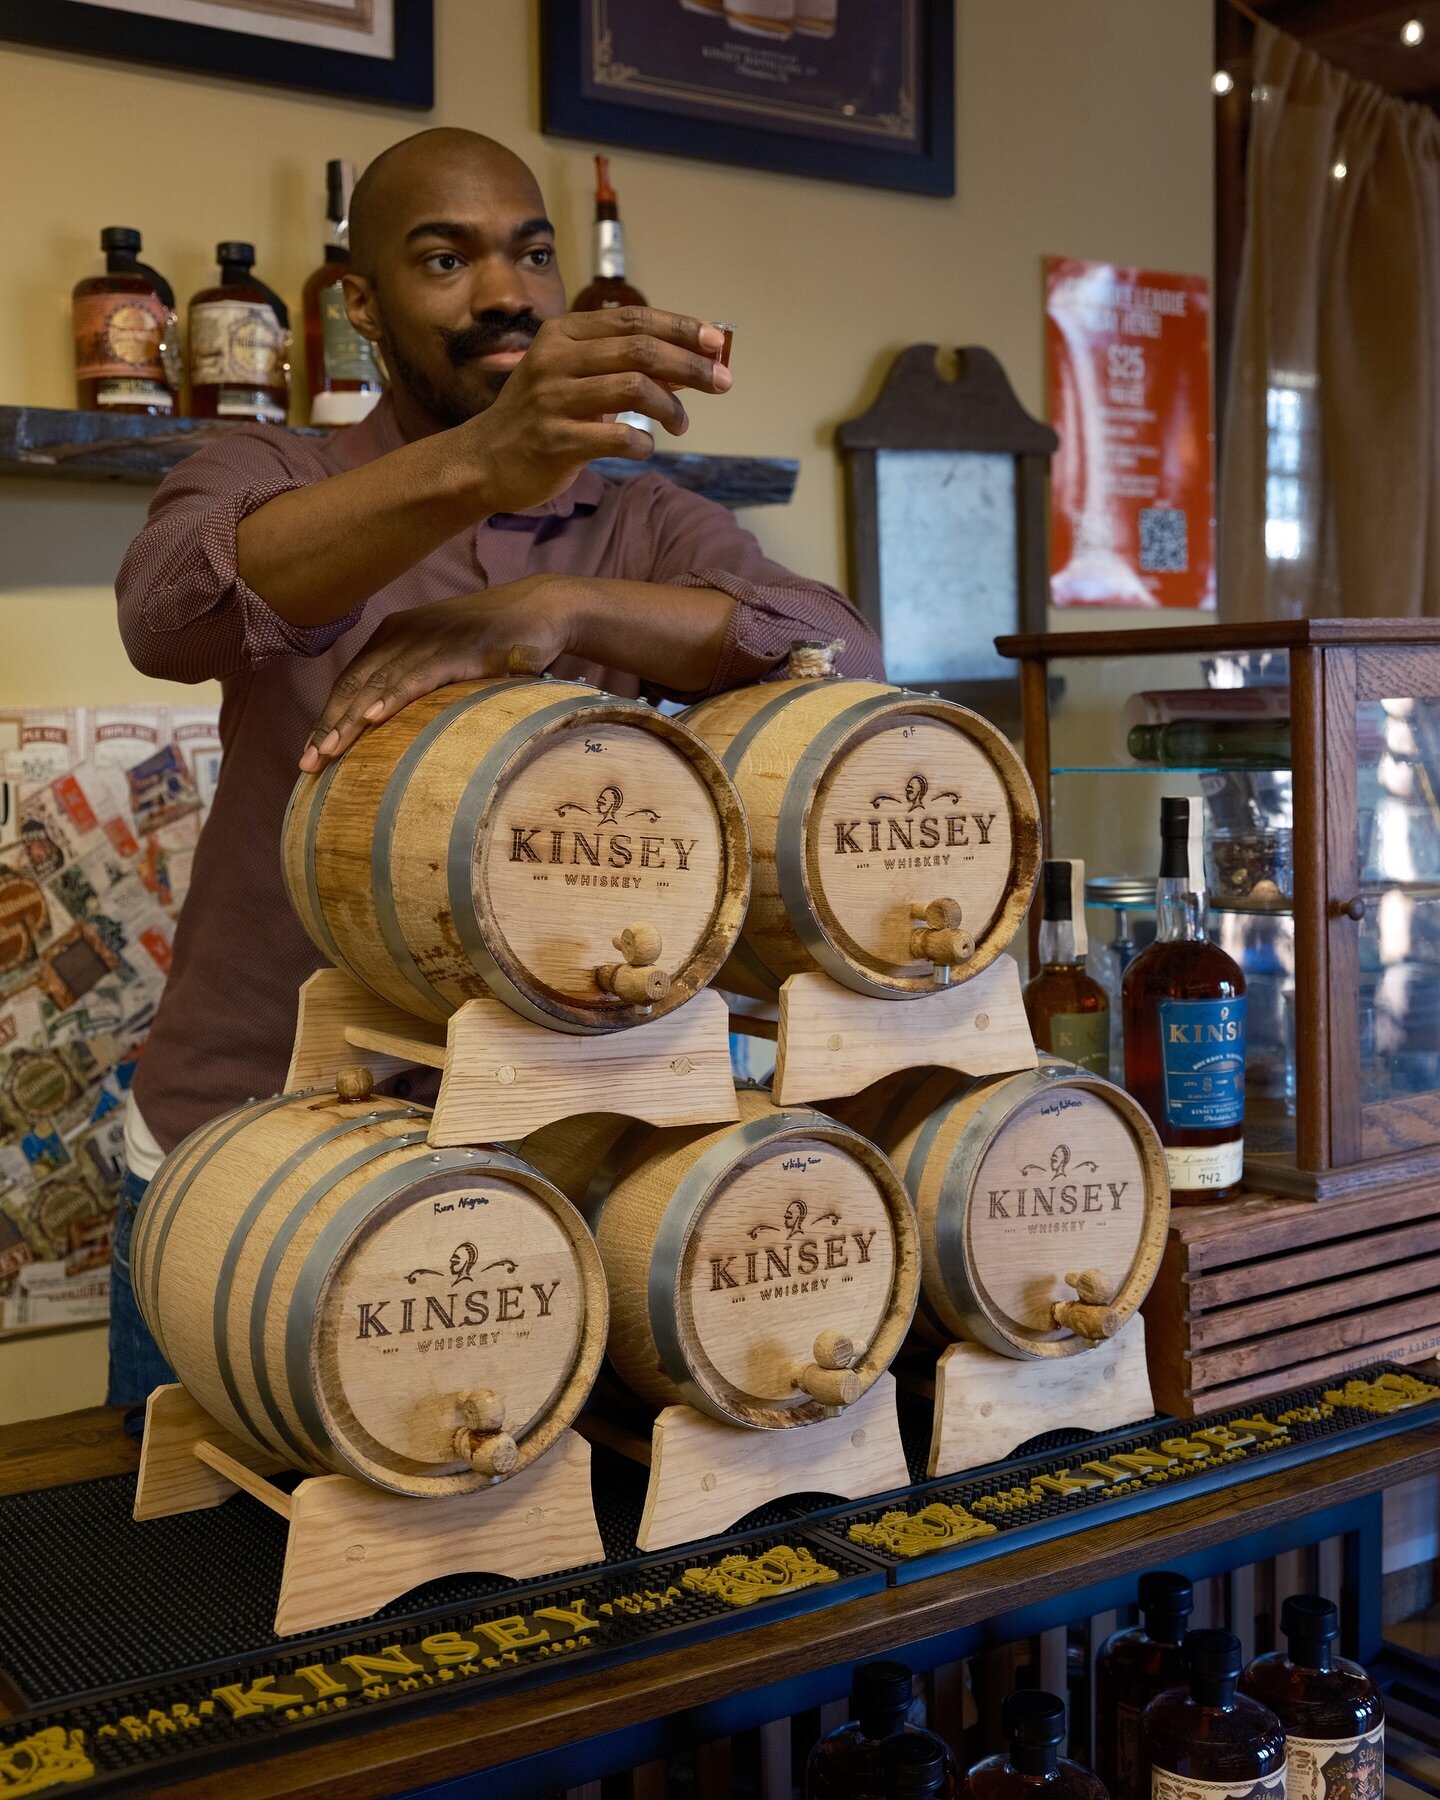 Have you tried our barrel aged cocktails? 🥃 The New Liberty Bottle Shop has&hellip;bottles of course, but we also offer a variety of delicious barrel aged cocktails for you to sip while you shop! Try everything from a Sazerac to a Whiskey Sour.

We&